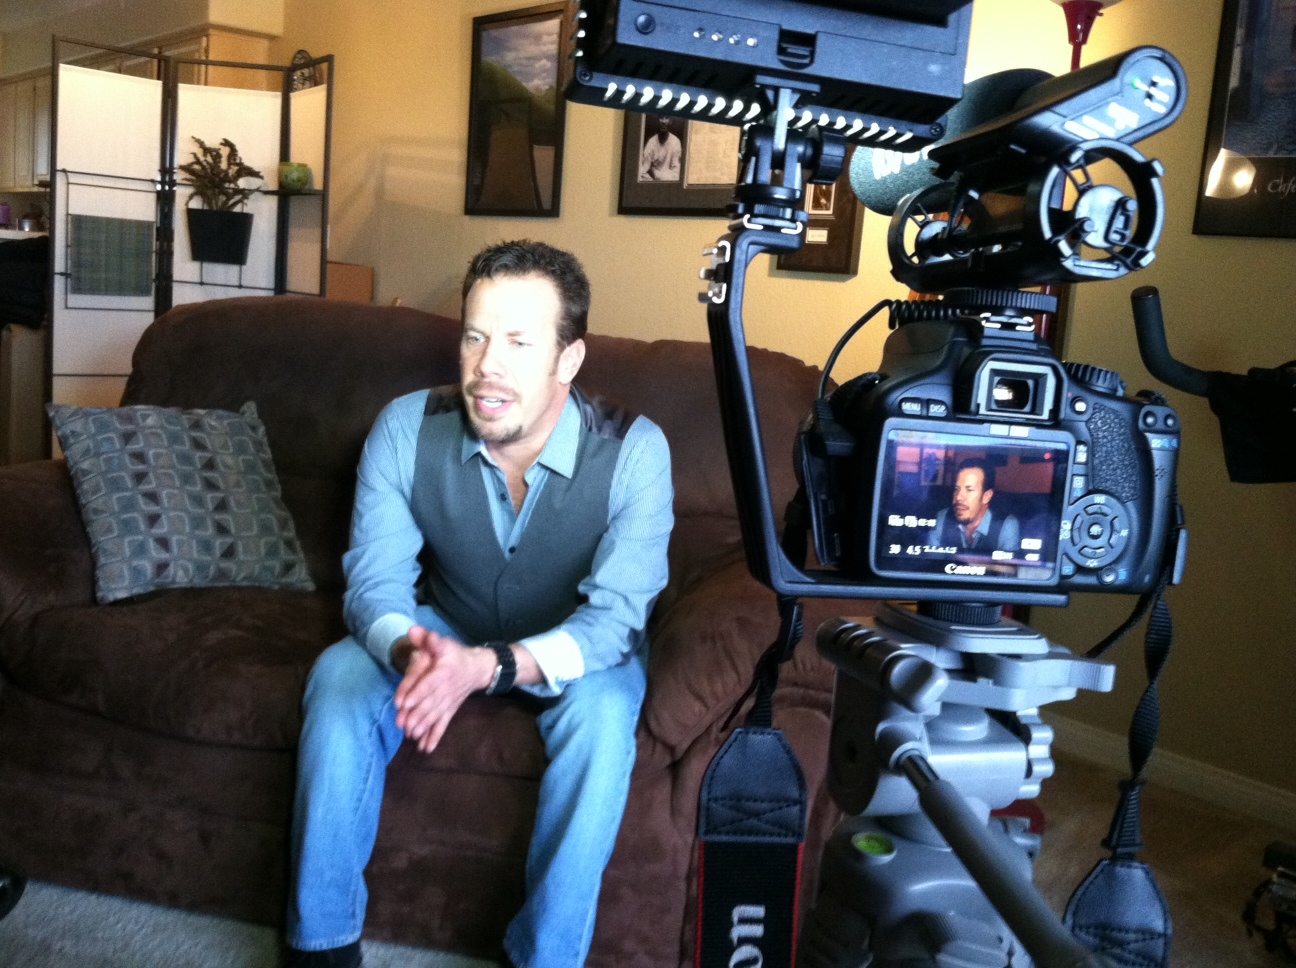 Being interviewed for the documentary The Last Formula.